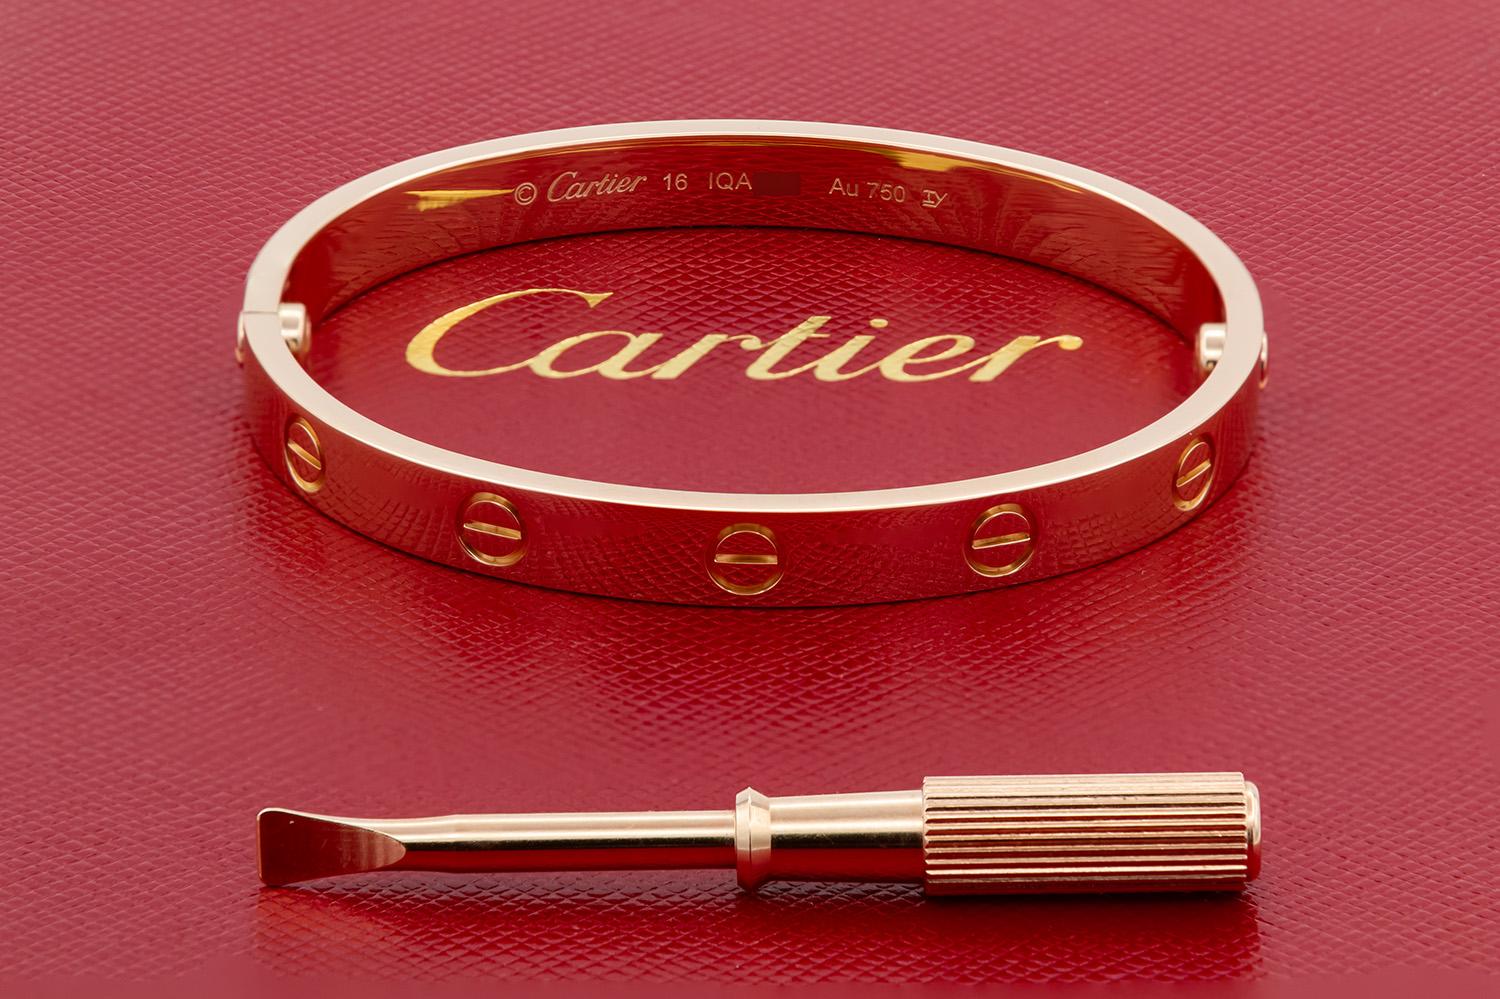 We are pleased to offer this Cartier 18K Rose Gold Love Bangle Bracelet Size 16. This bracelet was originally purchased from Cartier in August 2019 and it still in excellent condition! It features the new style screw system and comes complete with